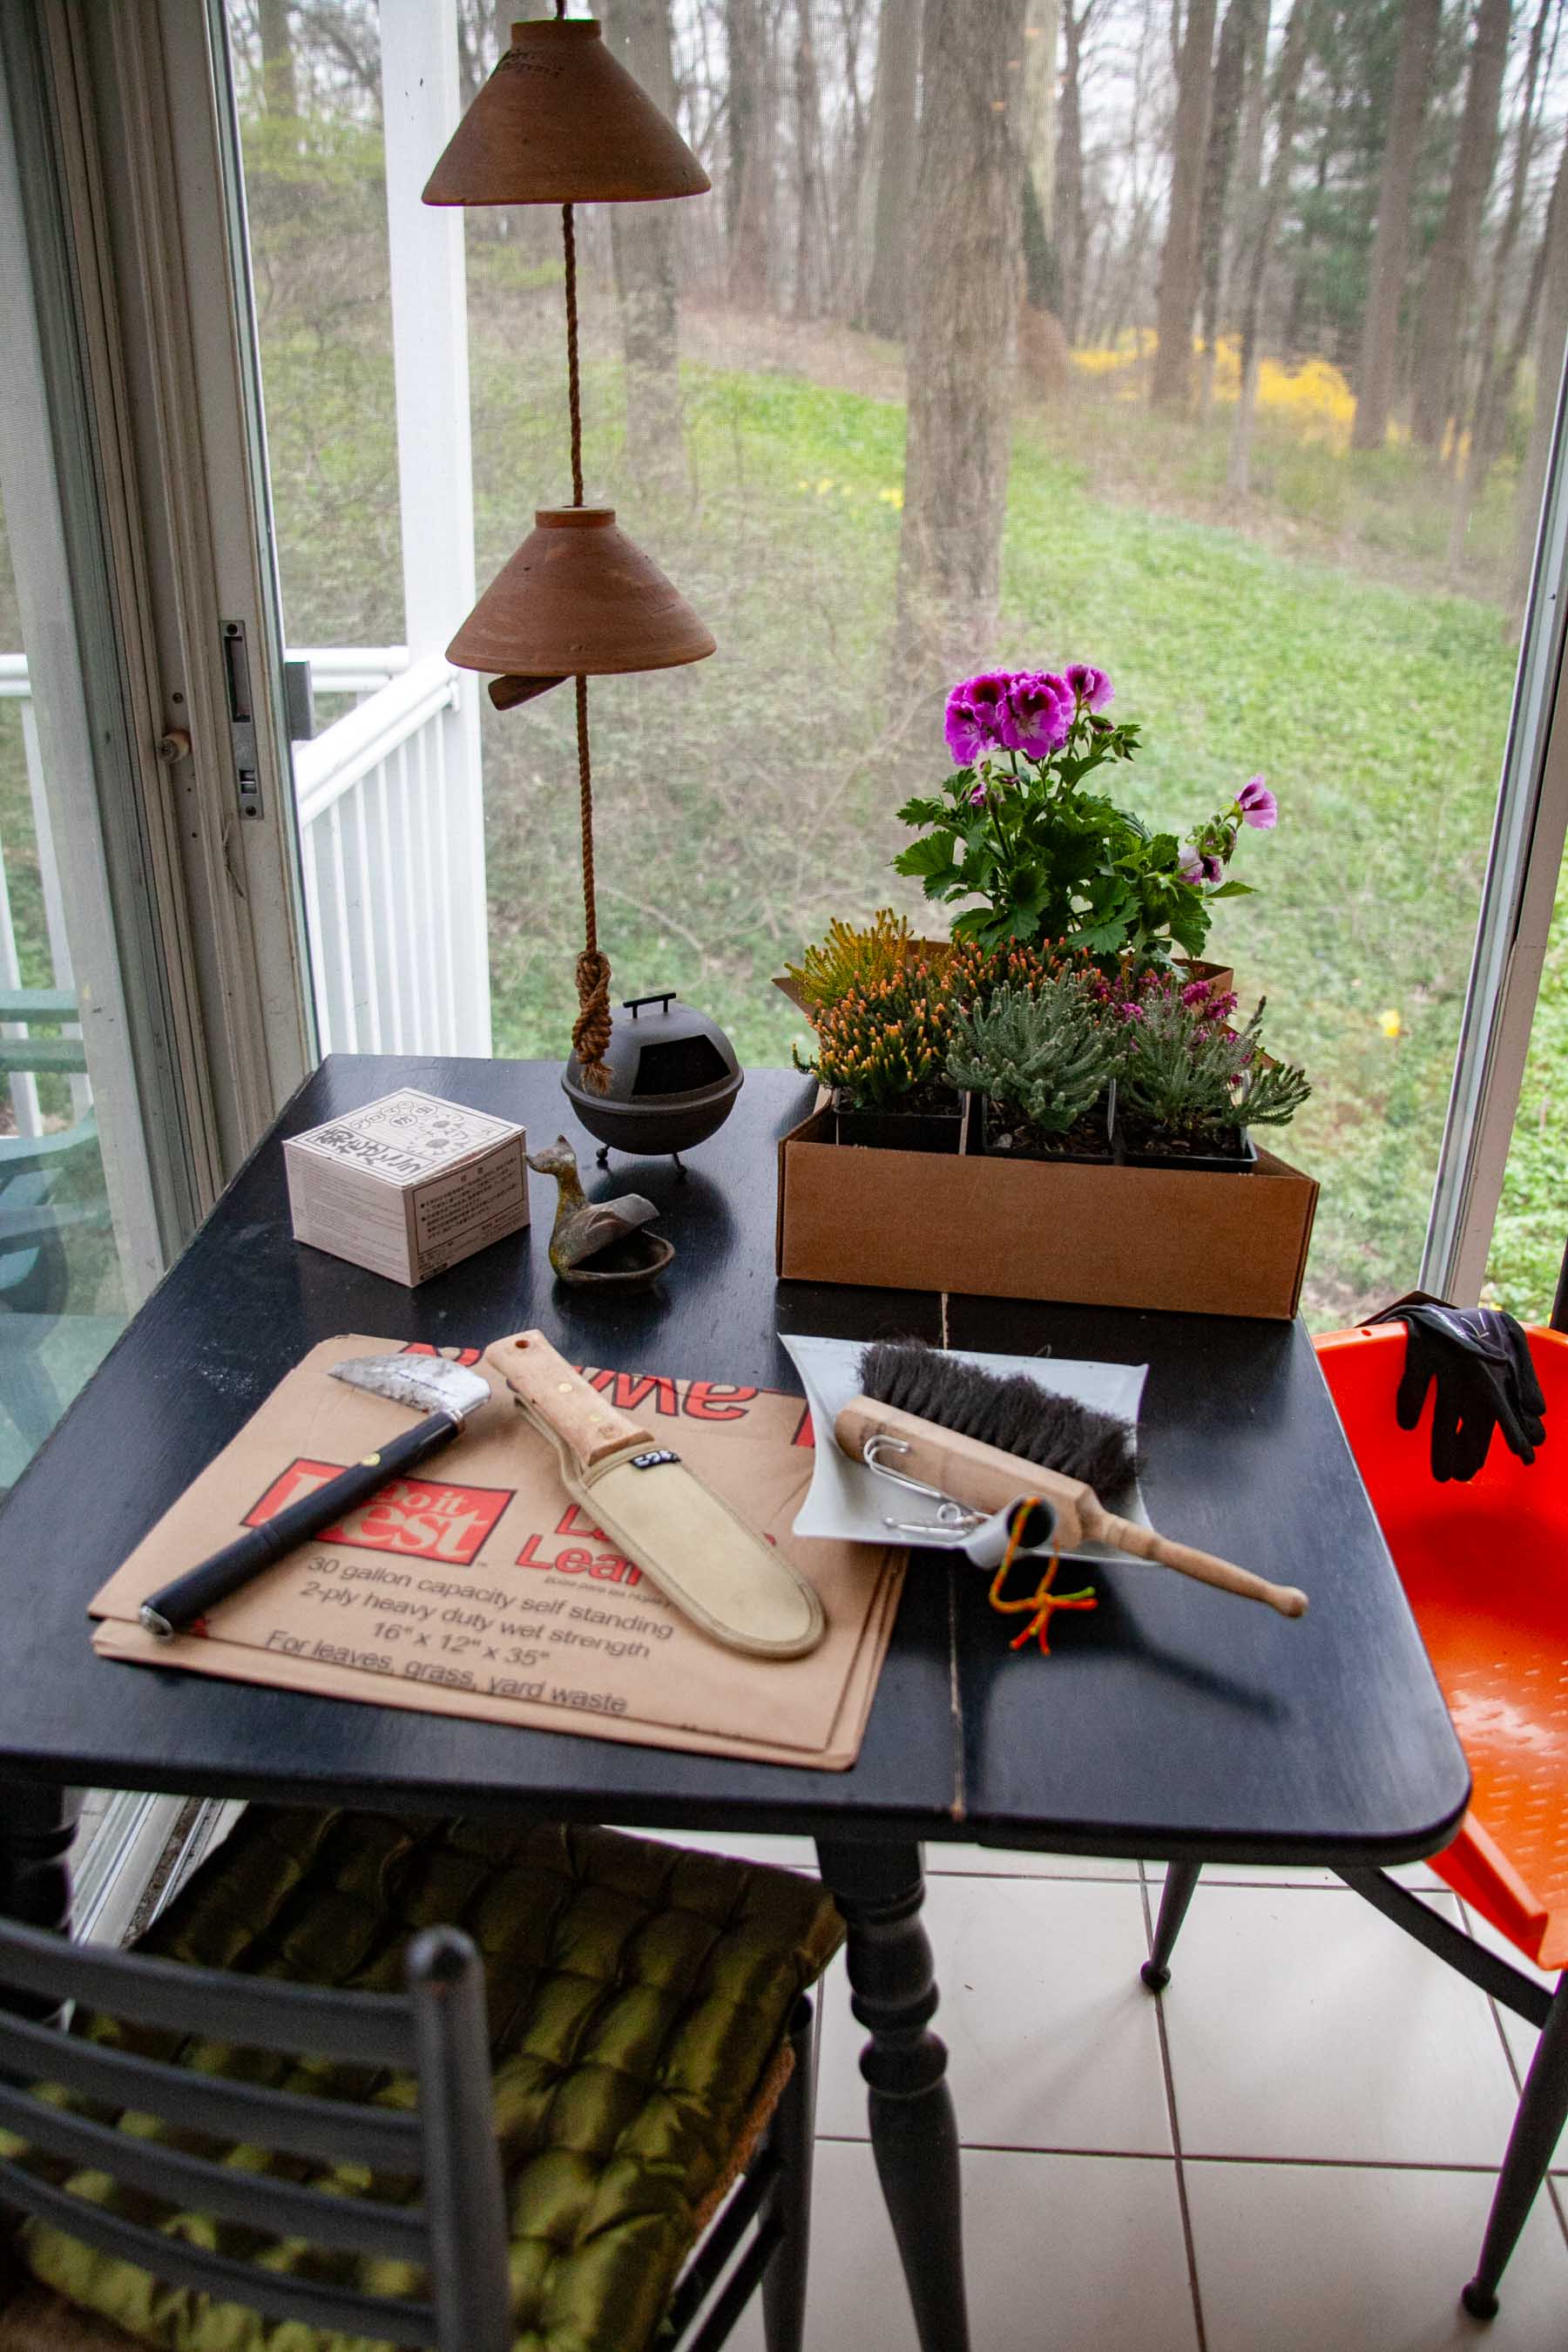 Supplies for early spring gardening set out on the porch table.